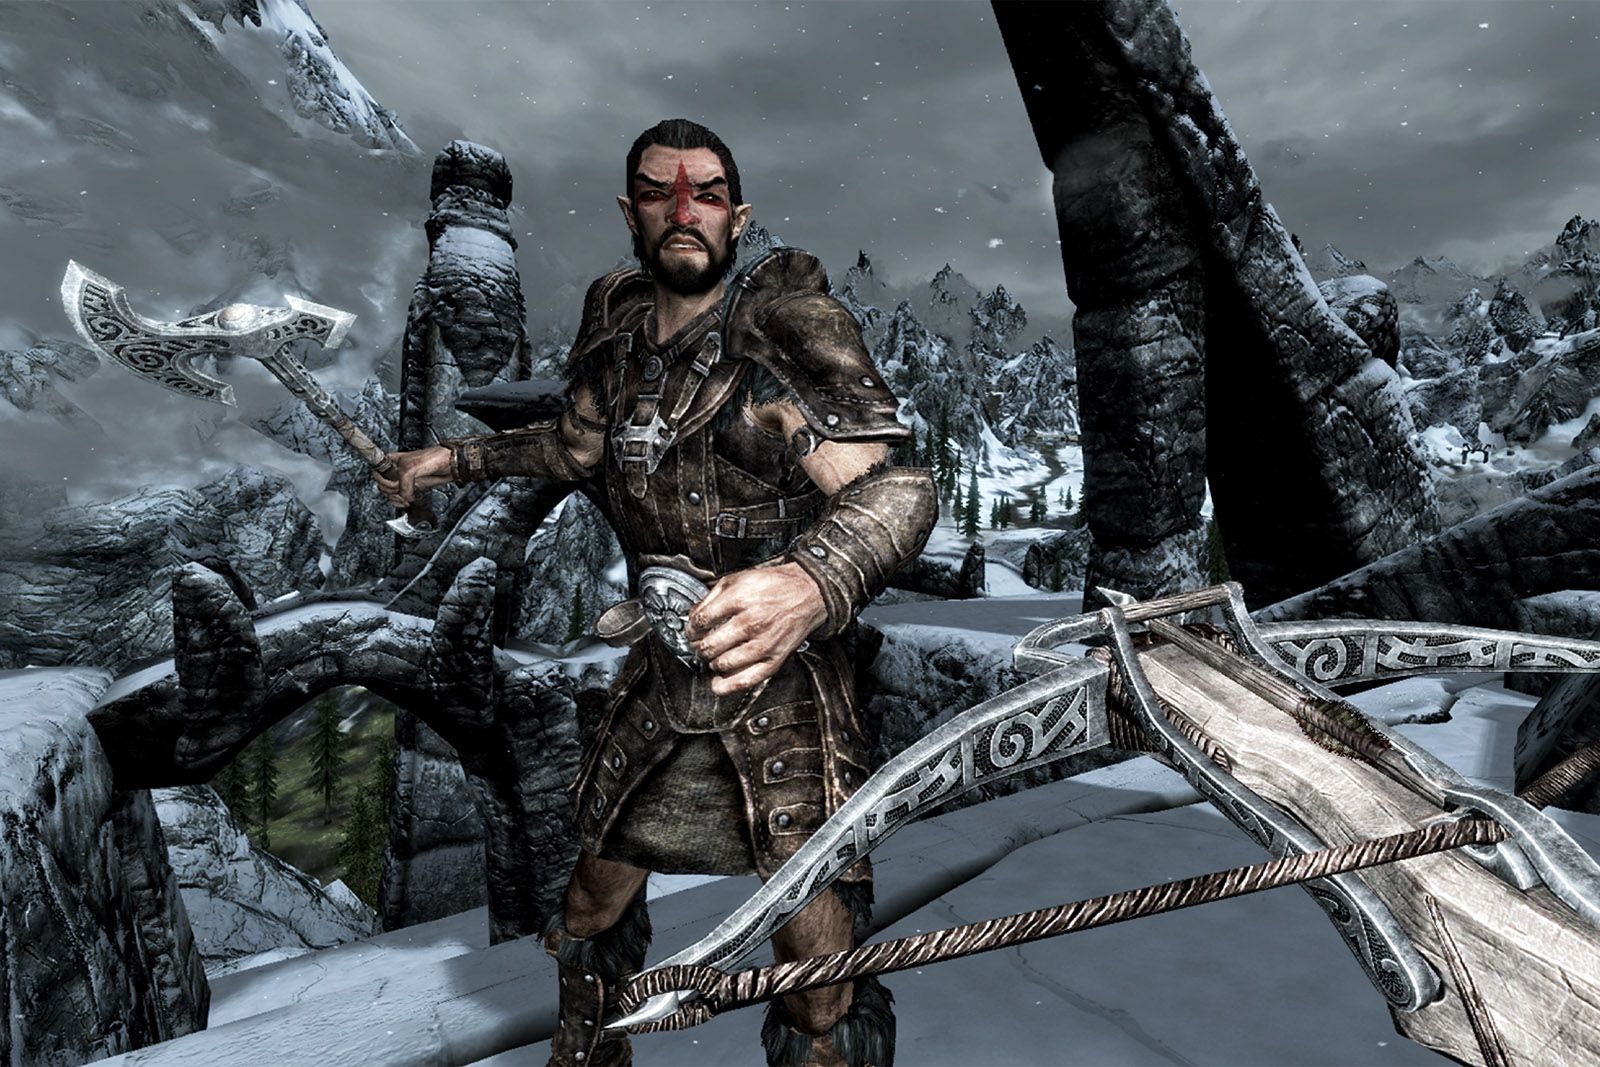 Skyrim Vr Review The Best Version Of Skyrim Yet image 5